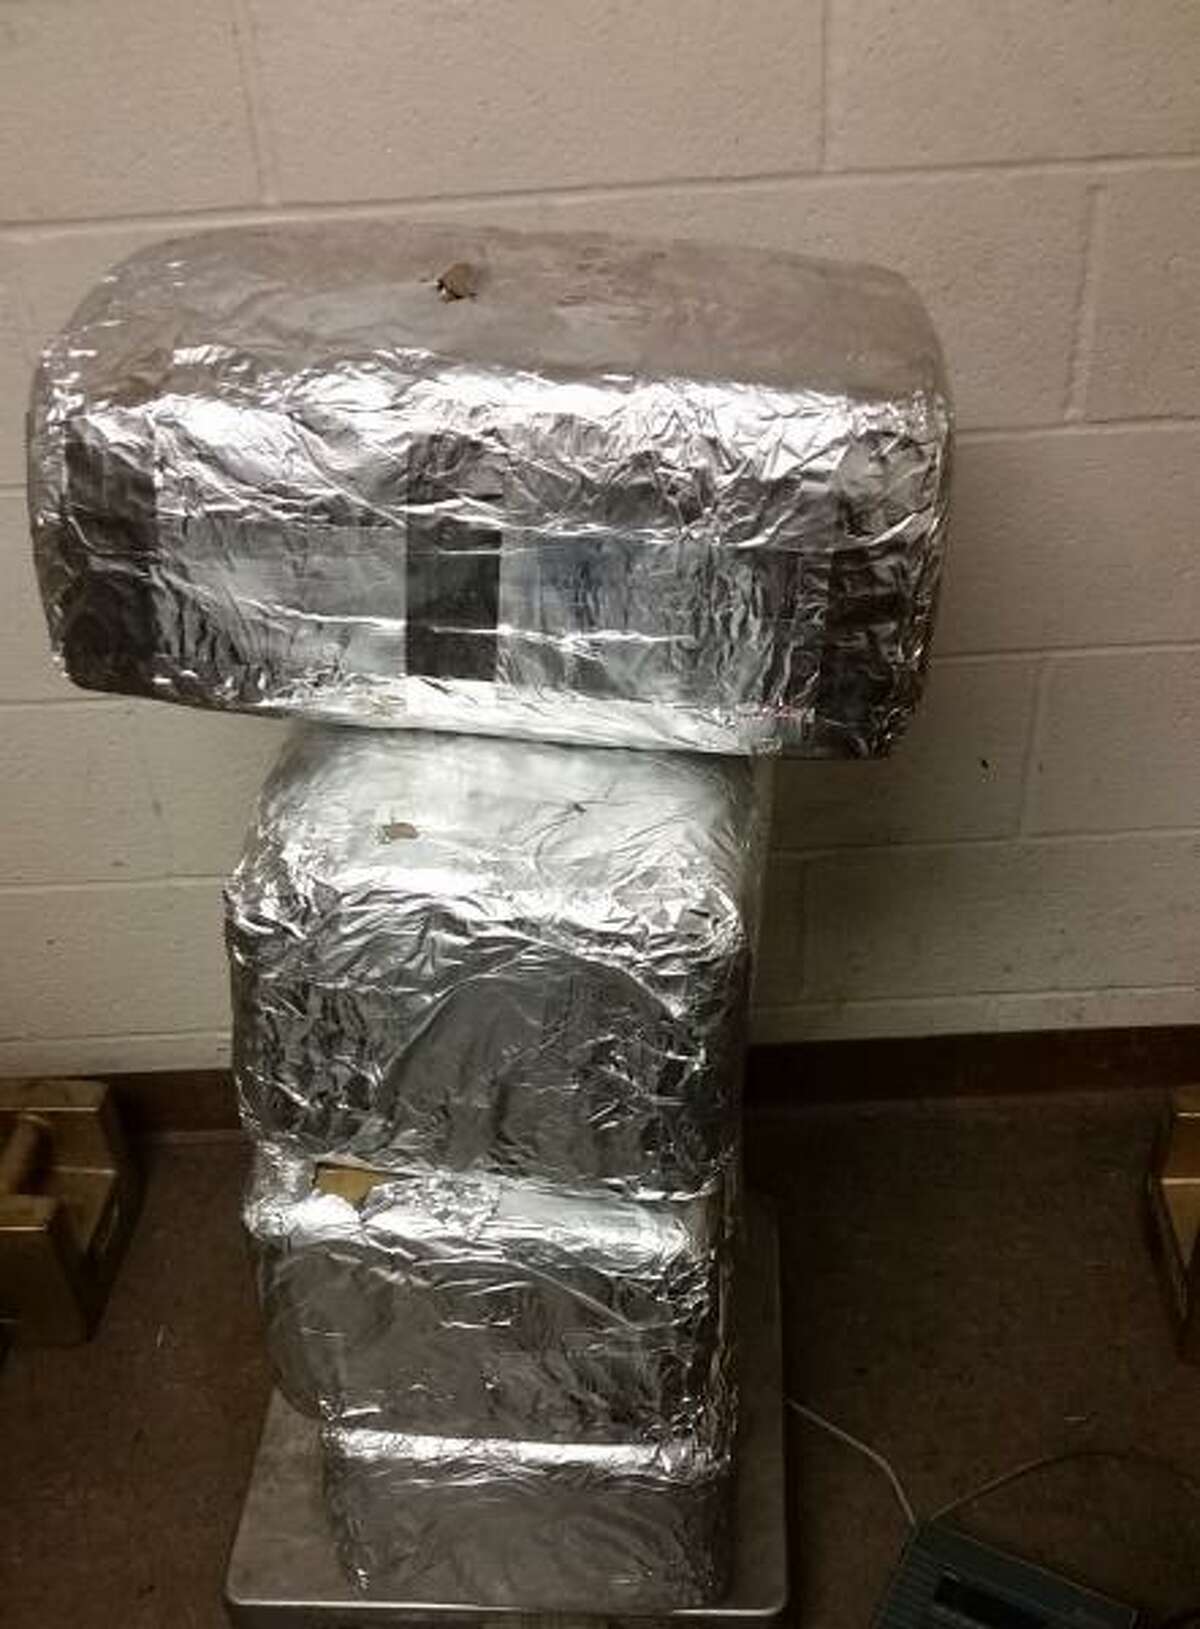 Location: Brownsville, Texas. Date: Feb. 23. Number of busts: 1. Seized contraband: 91 pounds of marijuana. Estimated street value: $18,219. Highlights: A 34-year-old female U.S. citizen and Brownsville, Texas, native attempted to enter the country at the Veterans International Bridge in her white 2008 Chrysler Town and Country. Upon inspection of the vehicle, CBP officers found four packages of marijuana (pictured above).